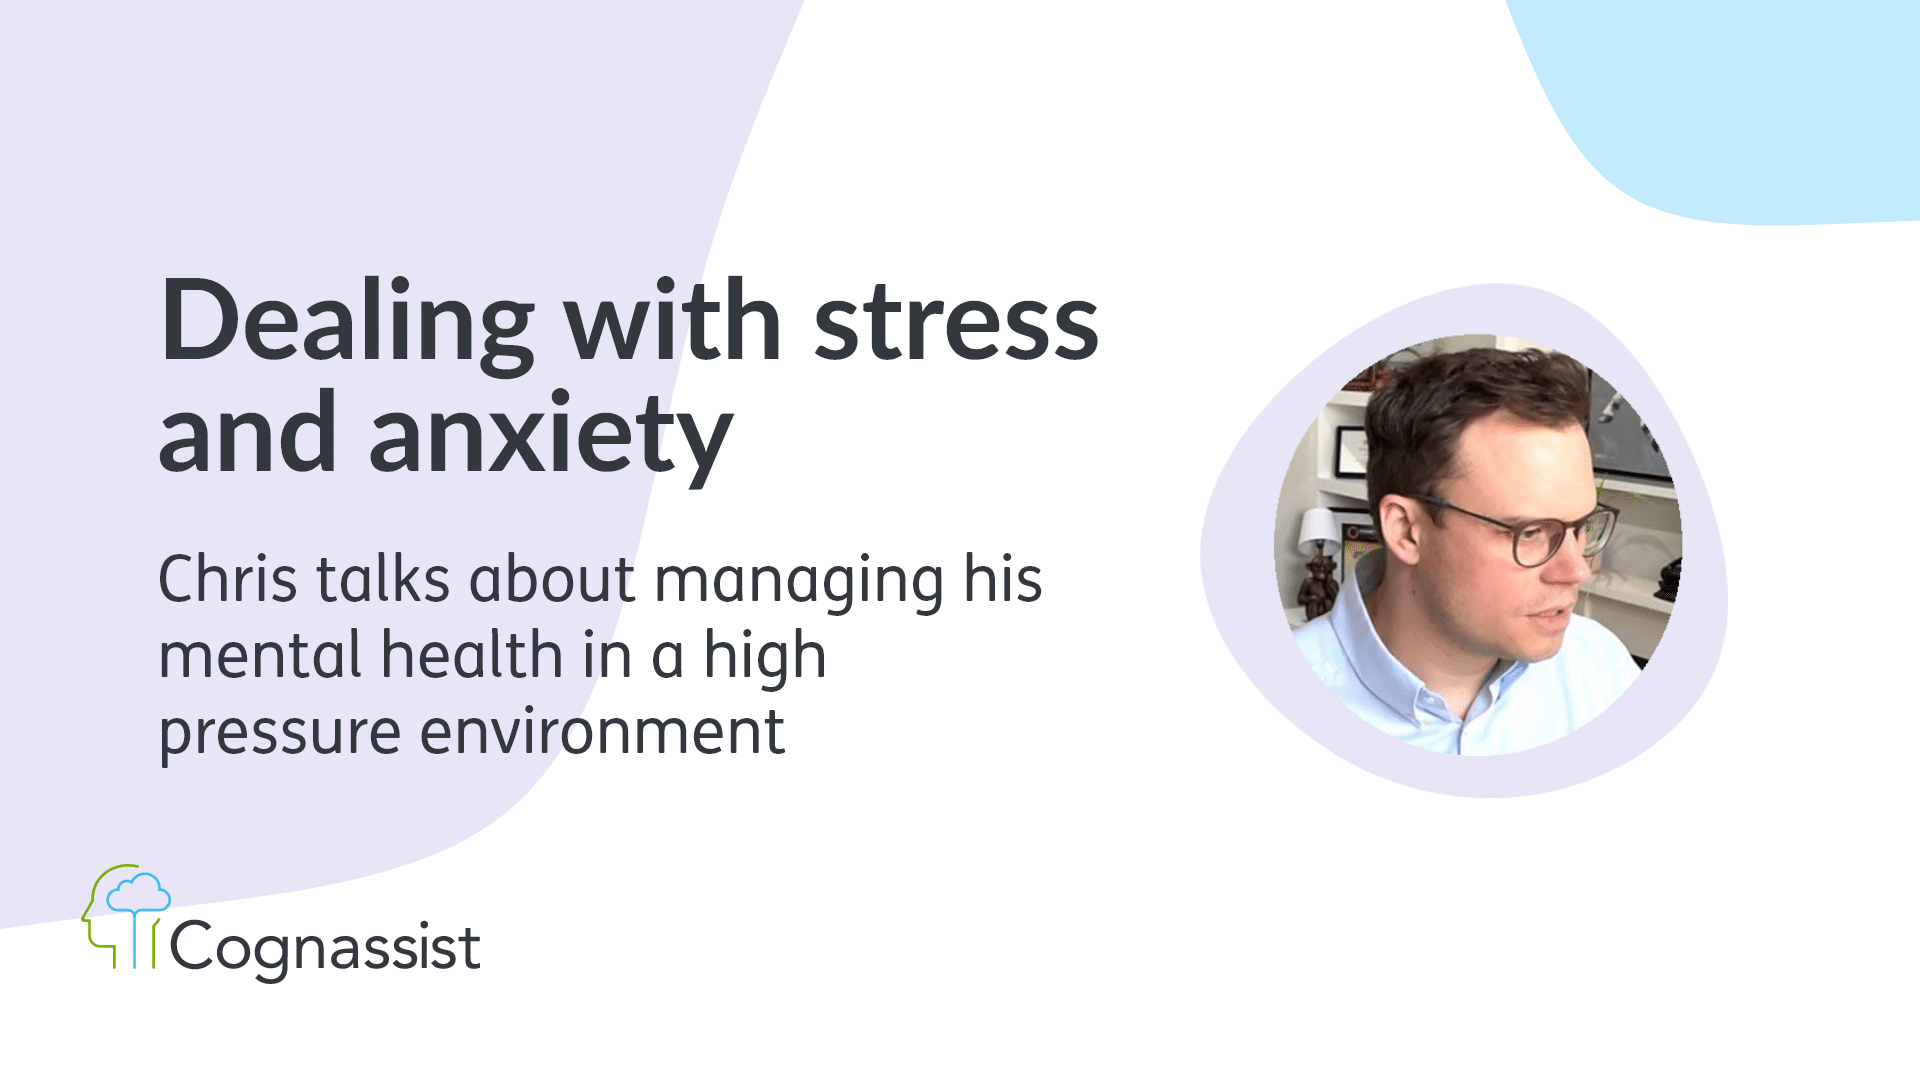 CEO talks about dealing with stress and anxiety